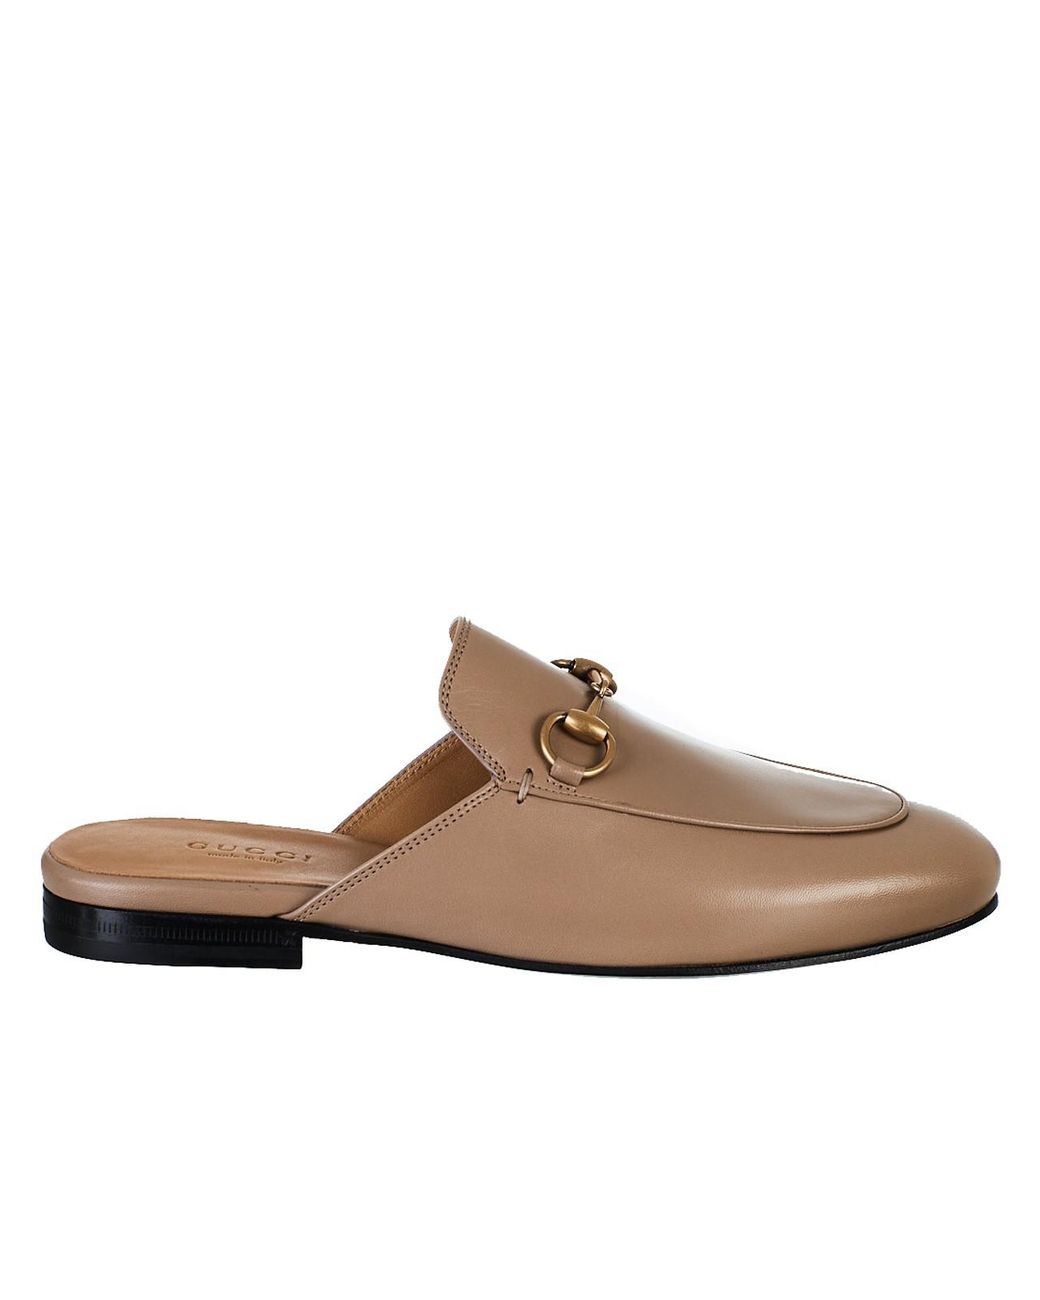 Gucci Women's Princetown Leather Slipper in Brown | Lyst